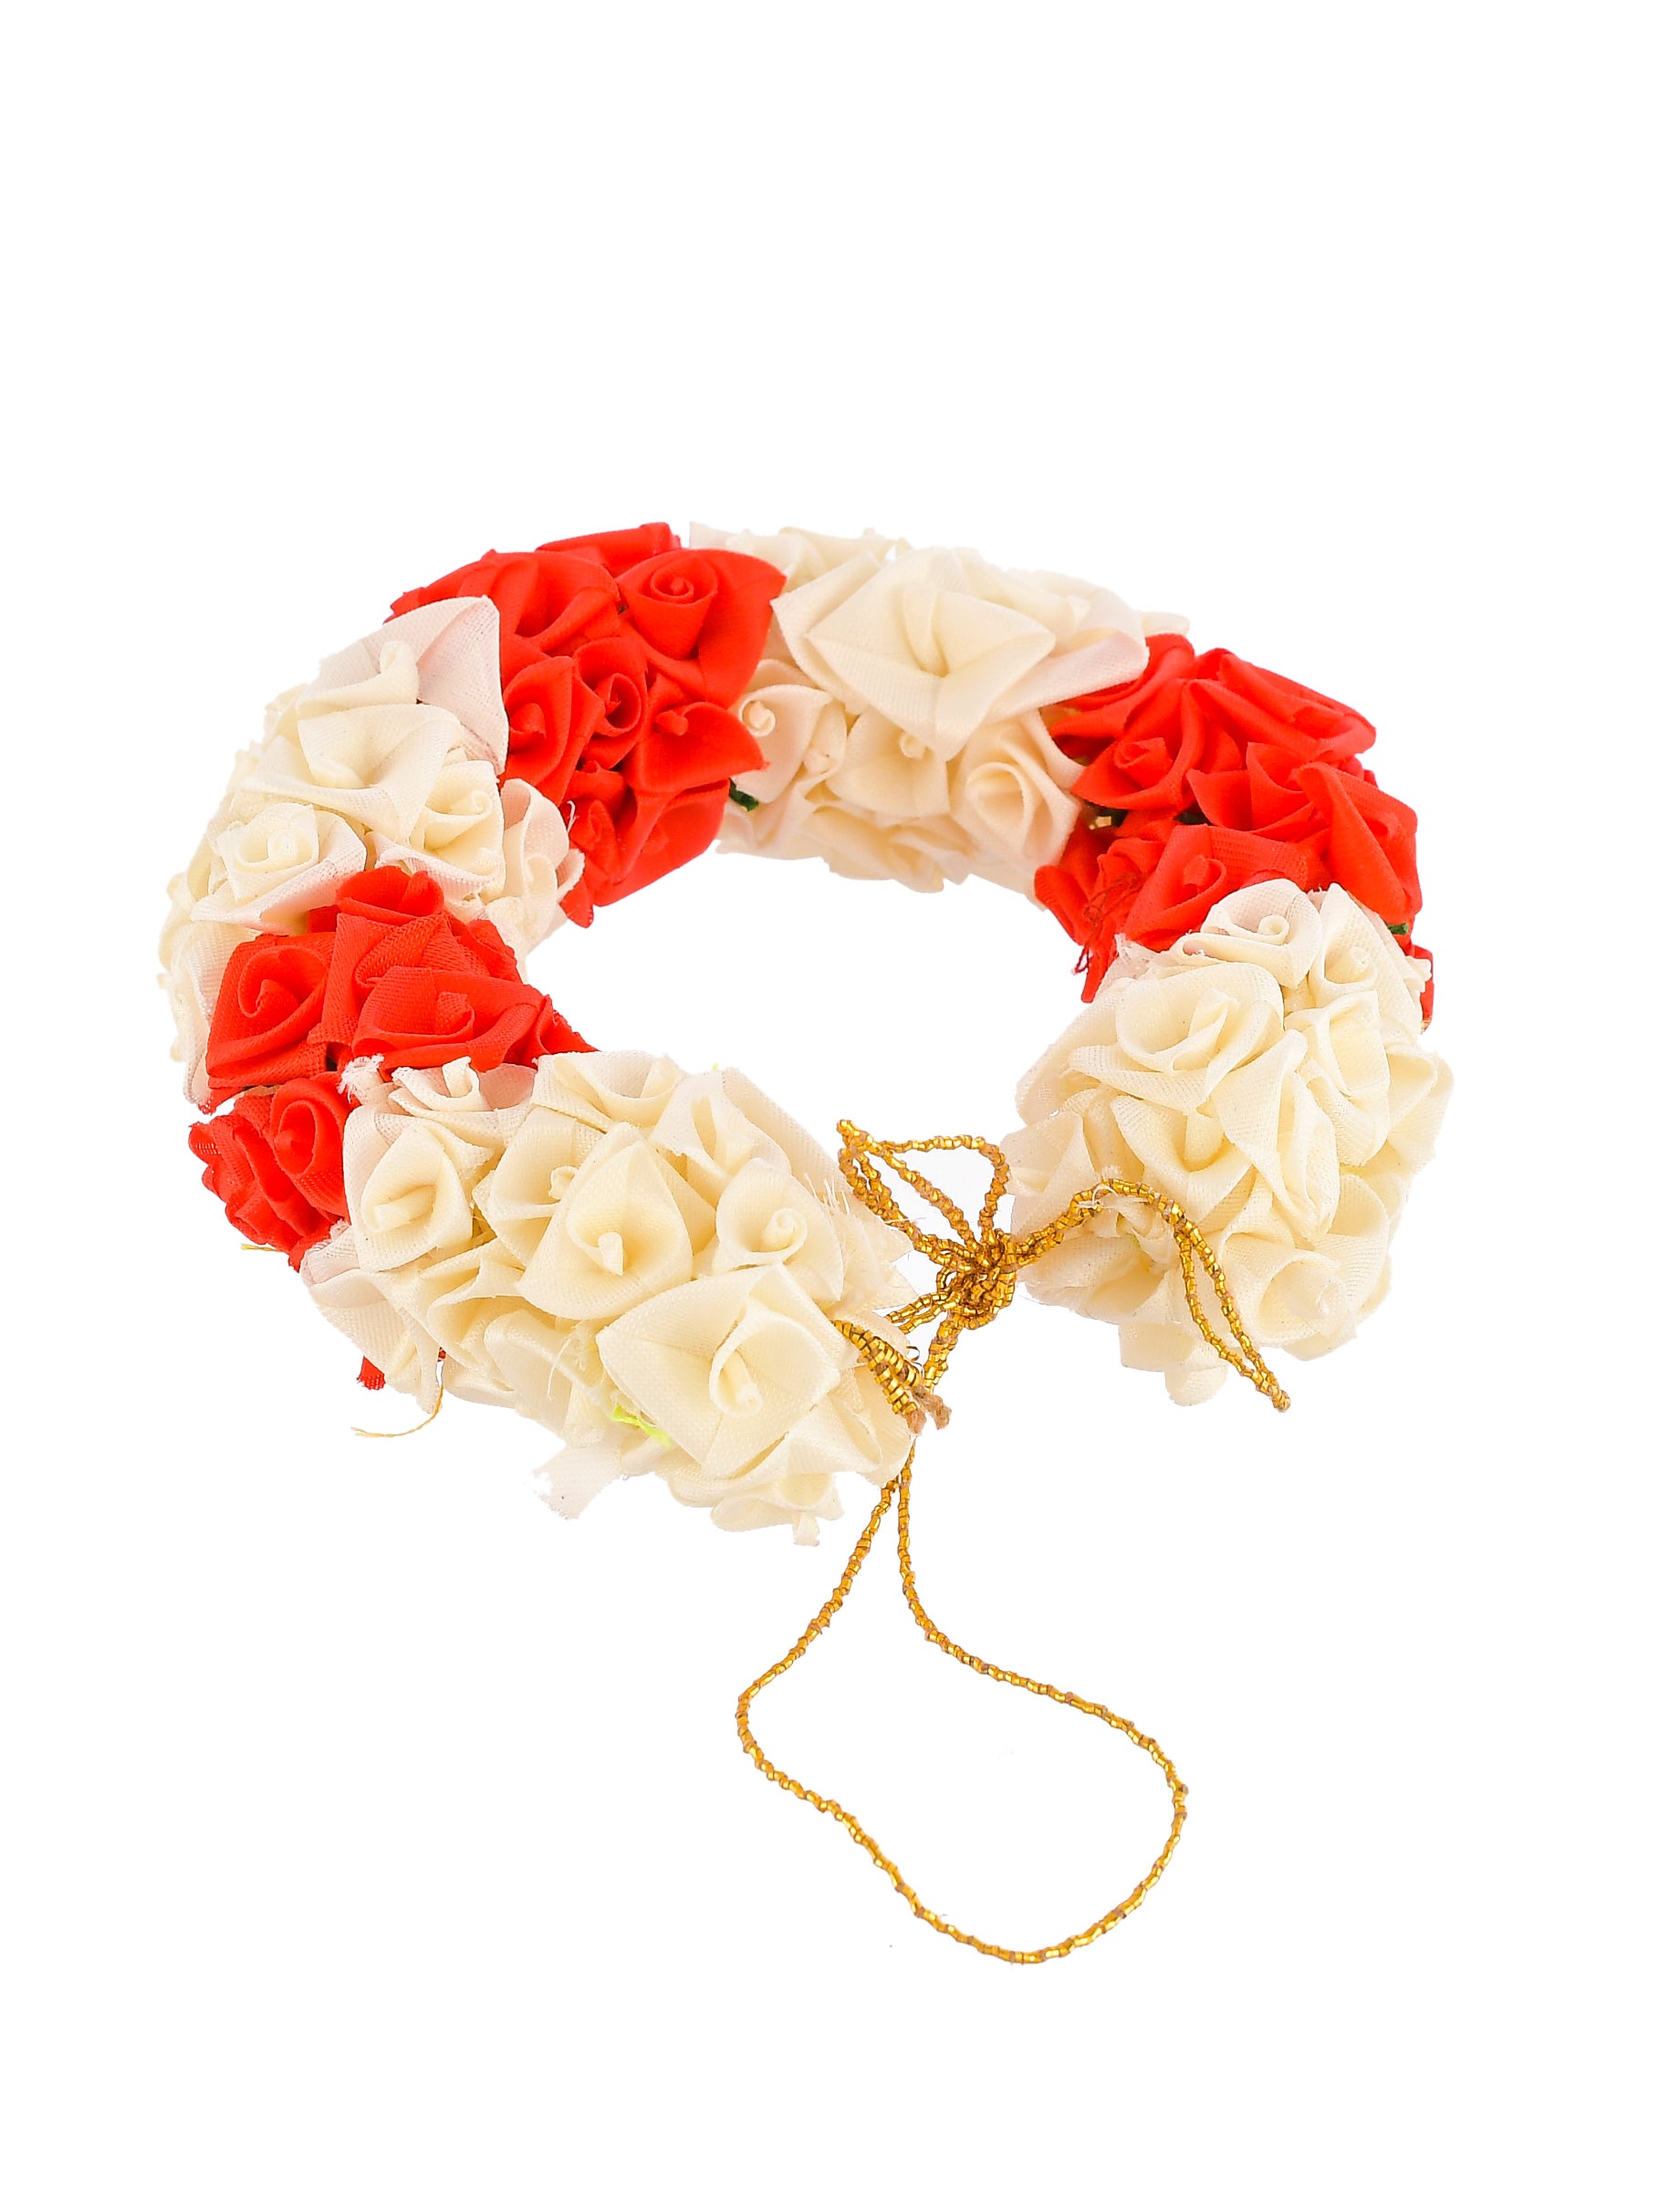 Red and White Flower Hair bun Accessory set